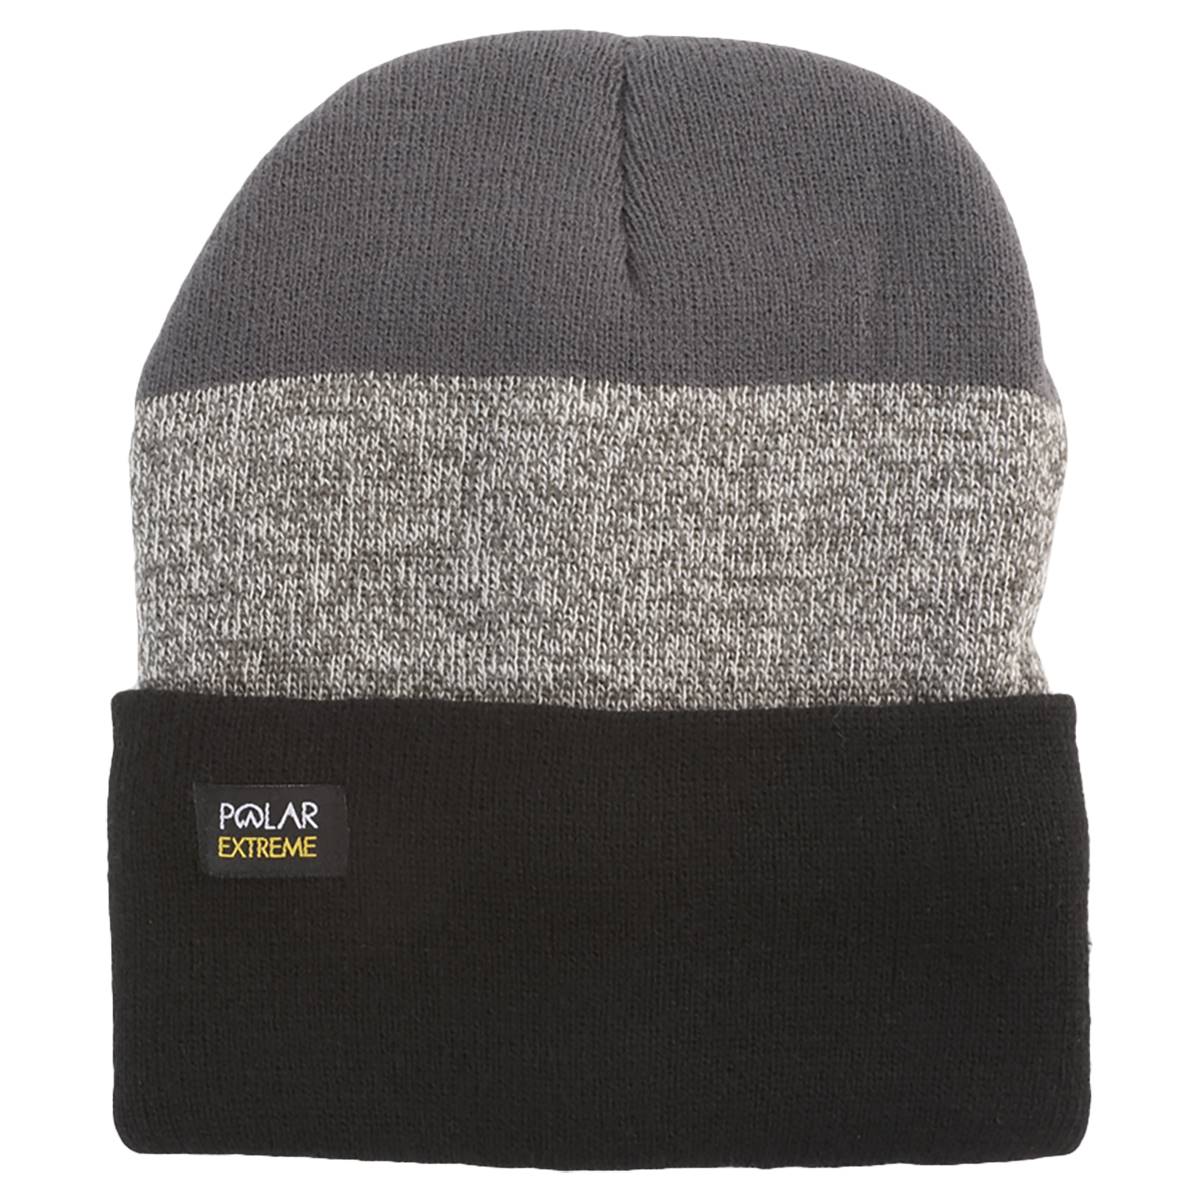 Mens Polar Extreme Cuffed Thermal Knit Hat